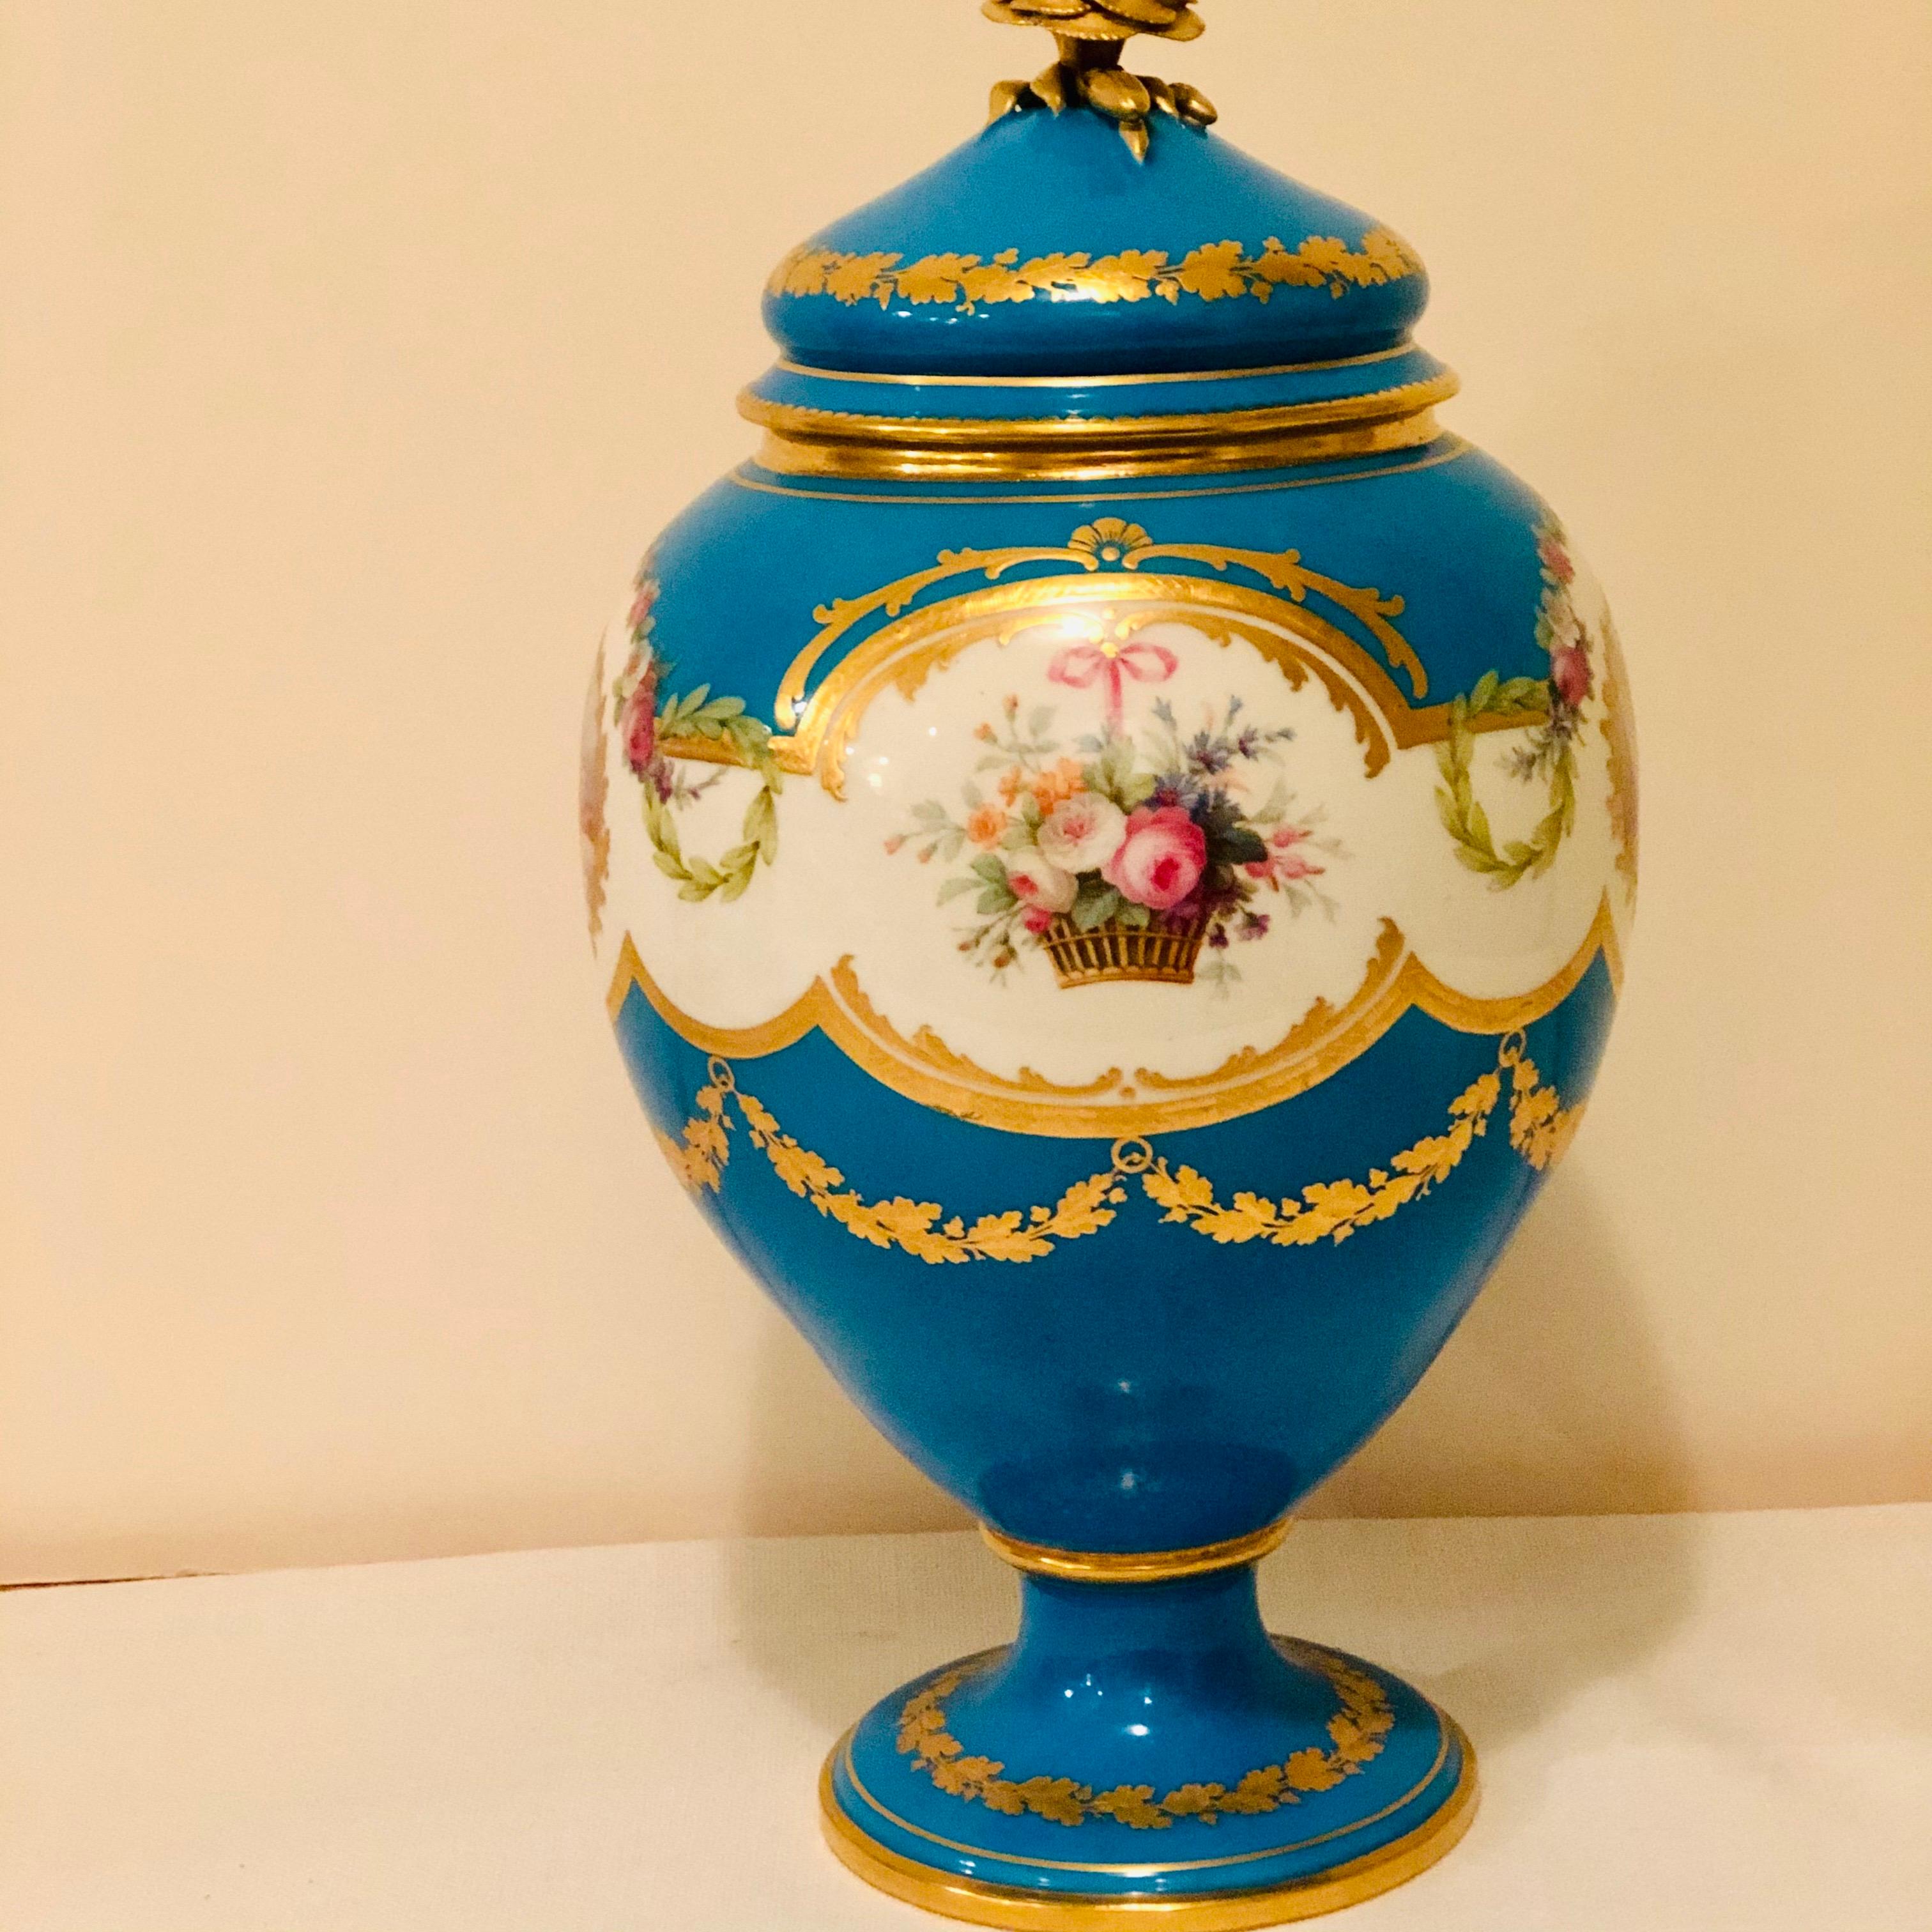 Hand-Painted Celeste Blue Minton Urn Painted with Cherubs and Flowers in the Style of Sèvres